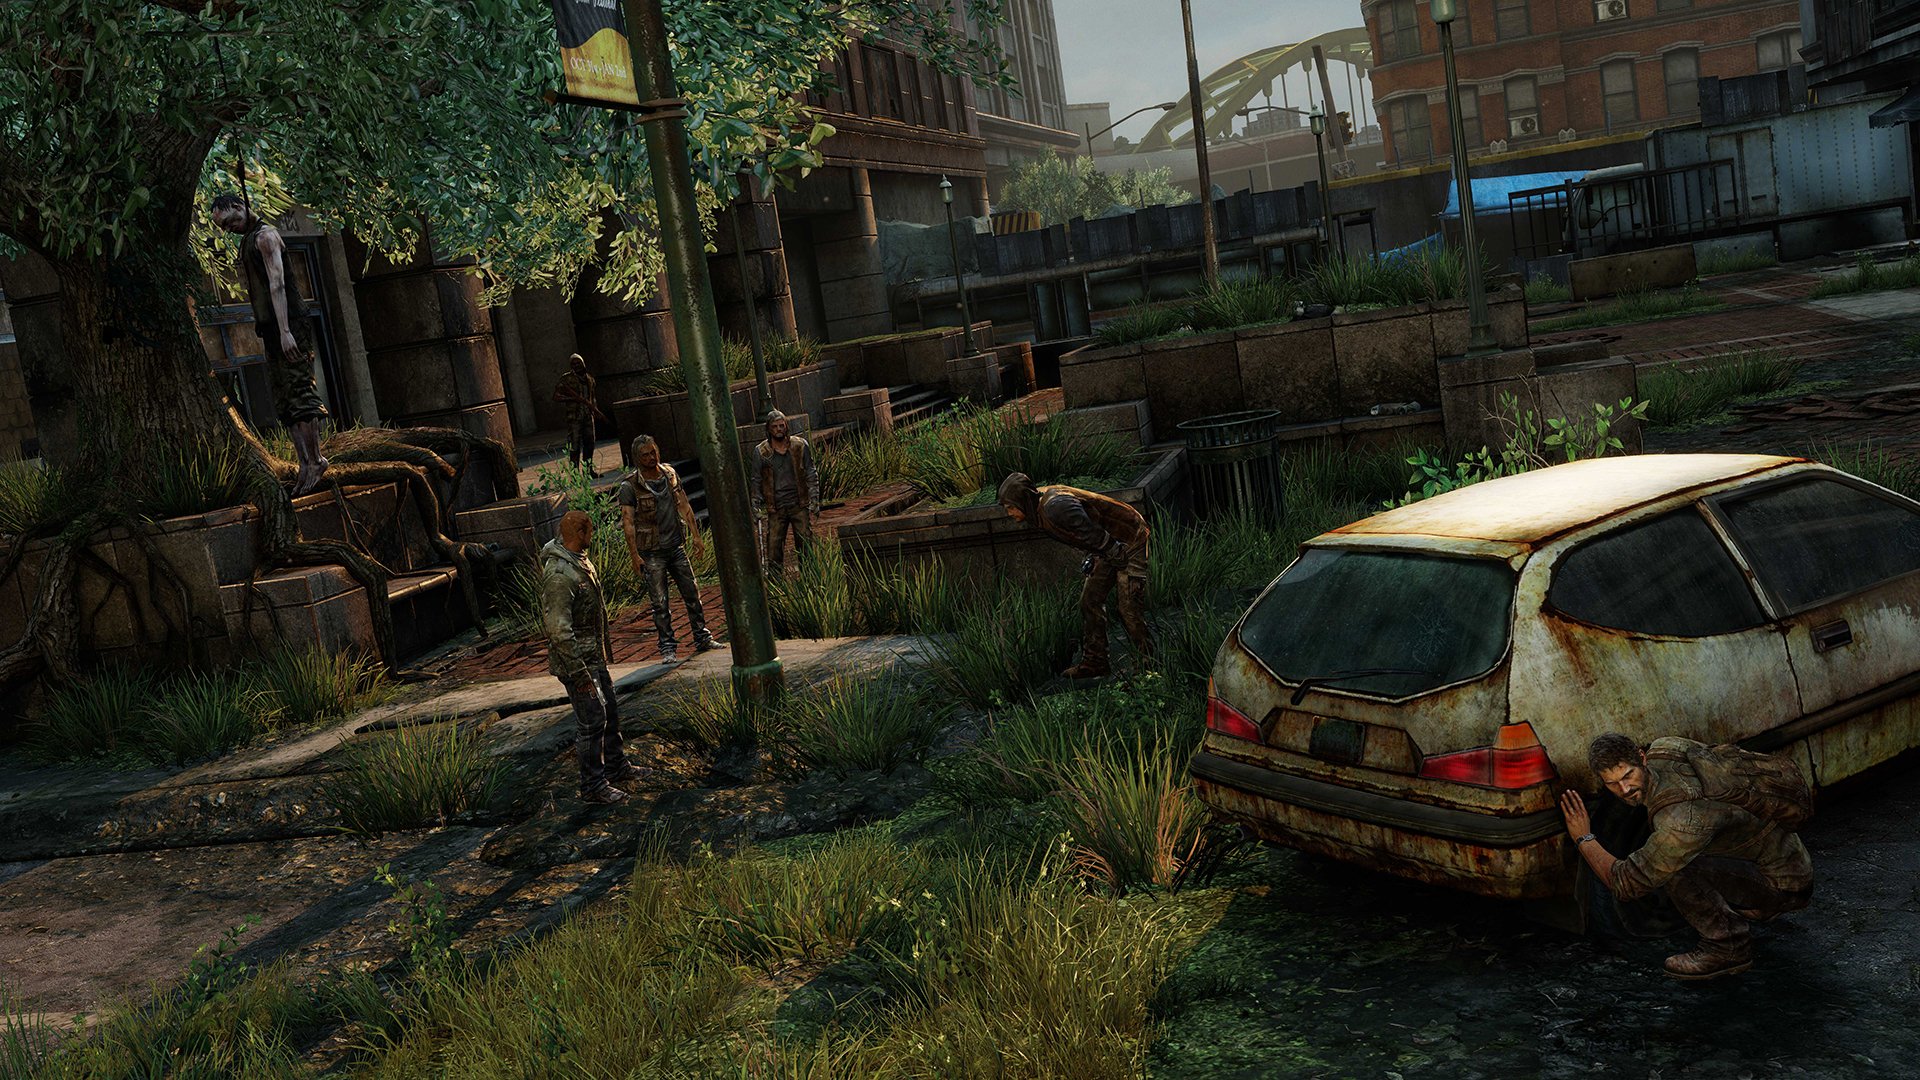 download the last of us remastered dlc